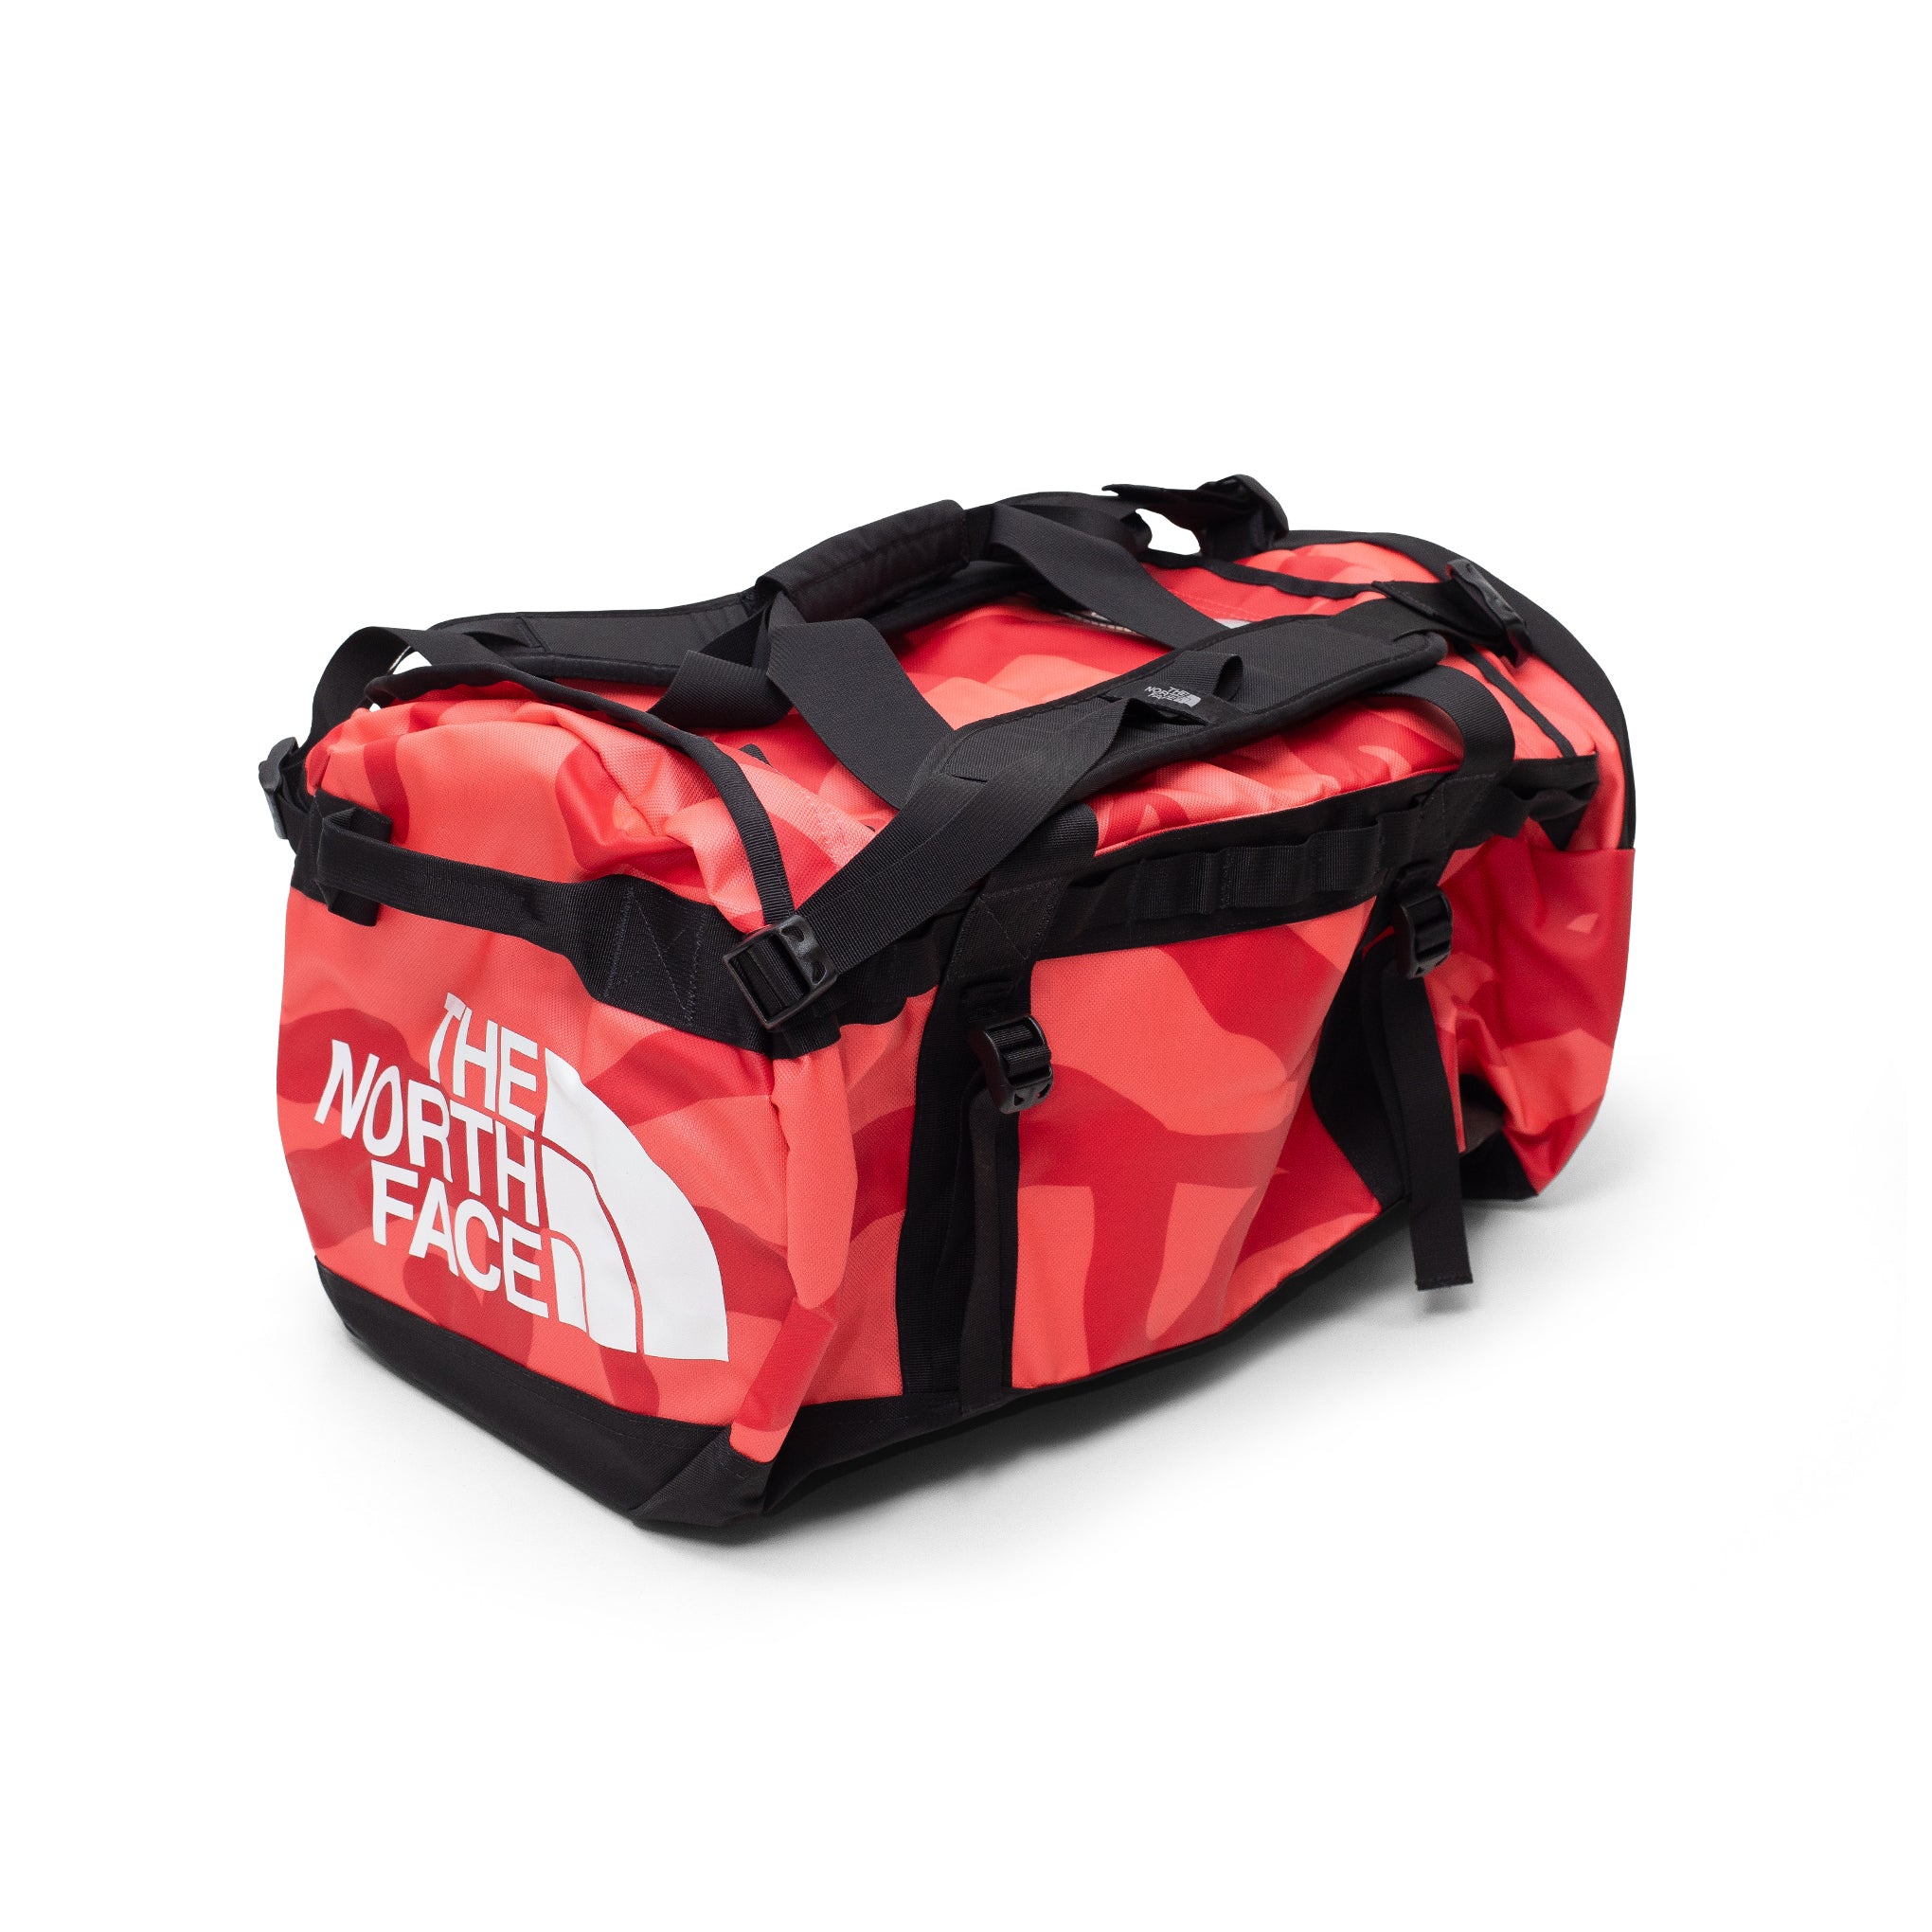 THE NORTH FACE KAWS DUFFLE BAG RED